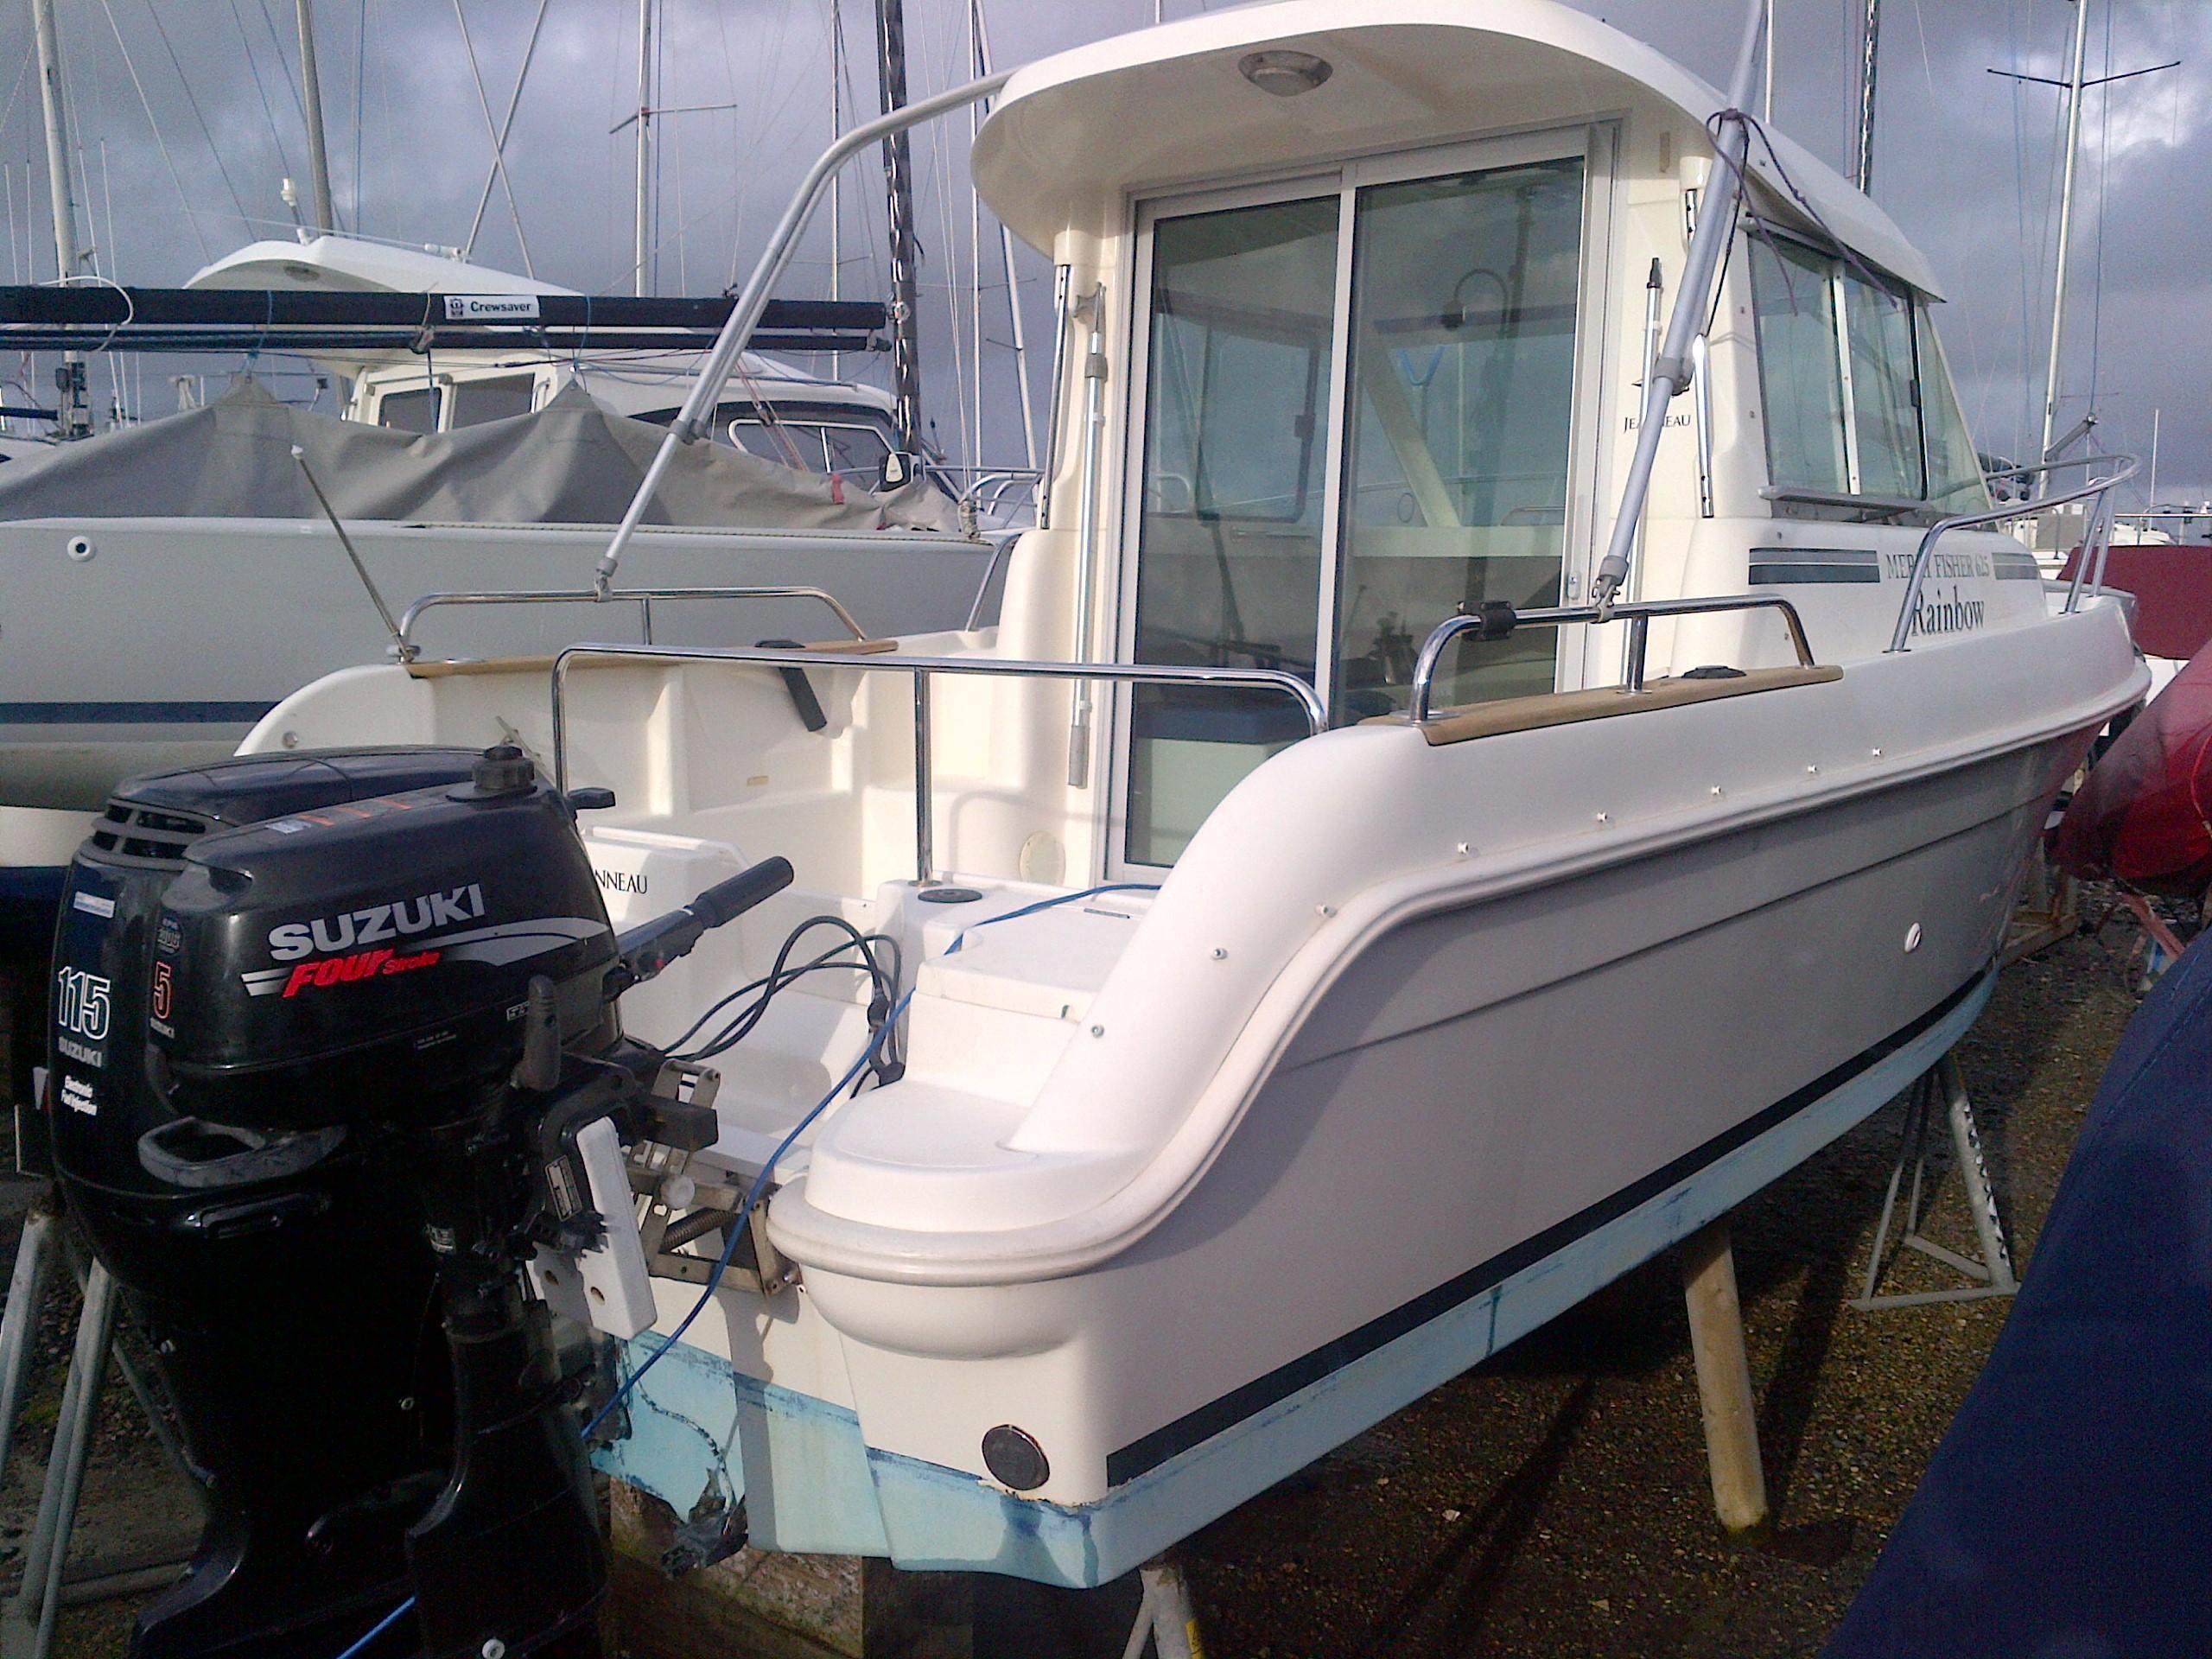 Jeanneau Merry Fisher 625 HB, Hayling Island, Hampshire